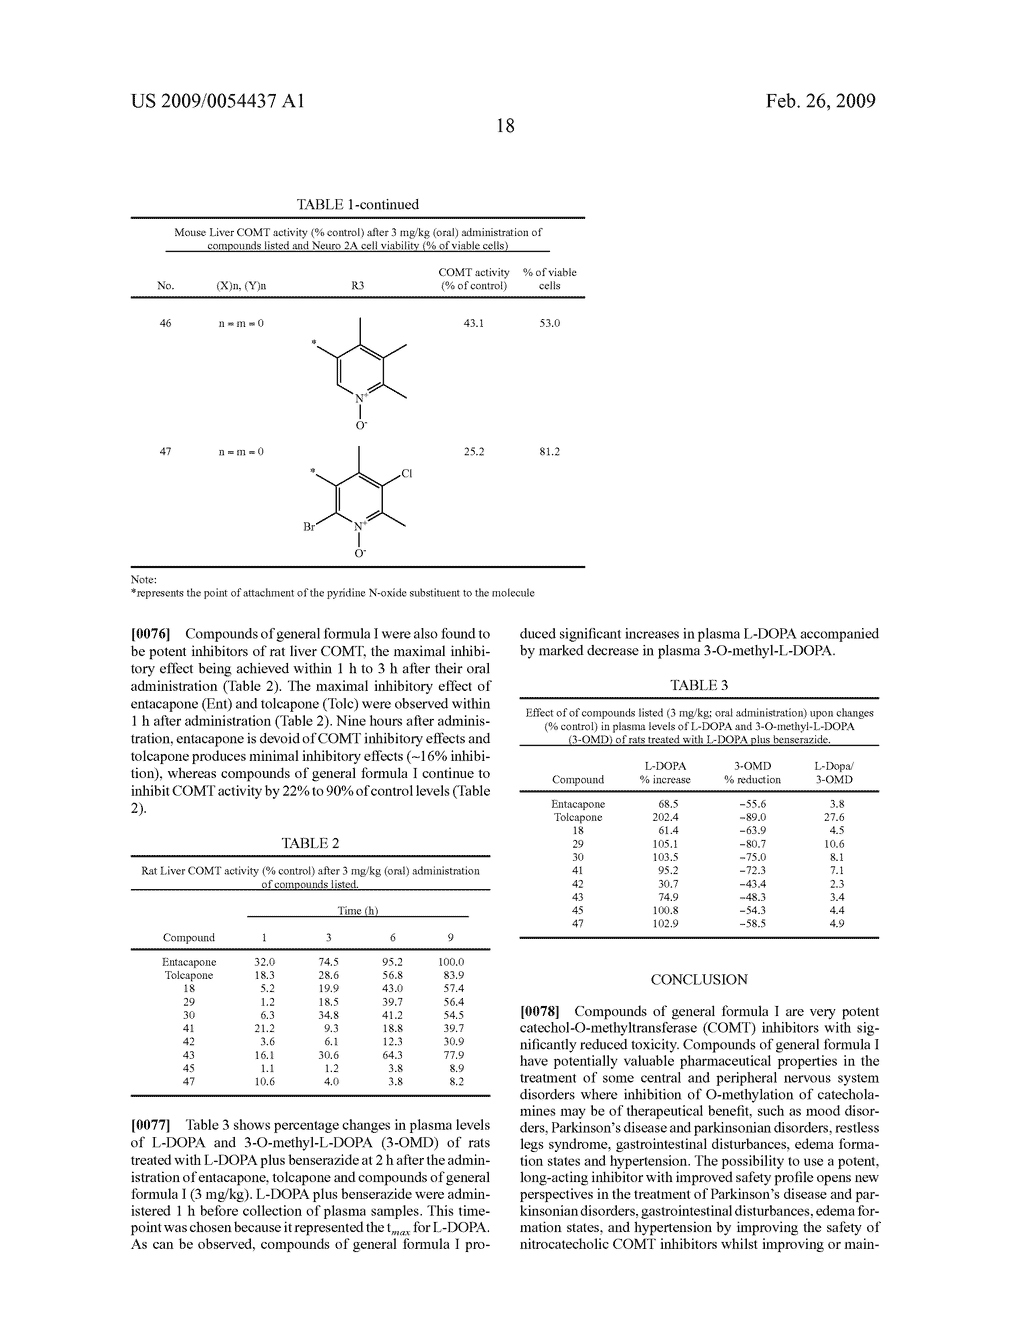 Nitrocatechol Derivatives as Comt Inhibitors - diagram, schematic, and image 19